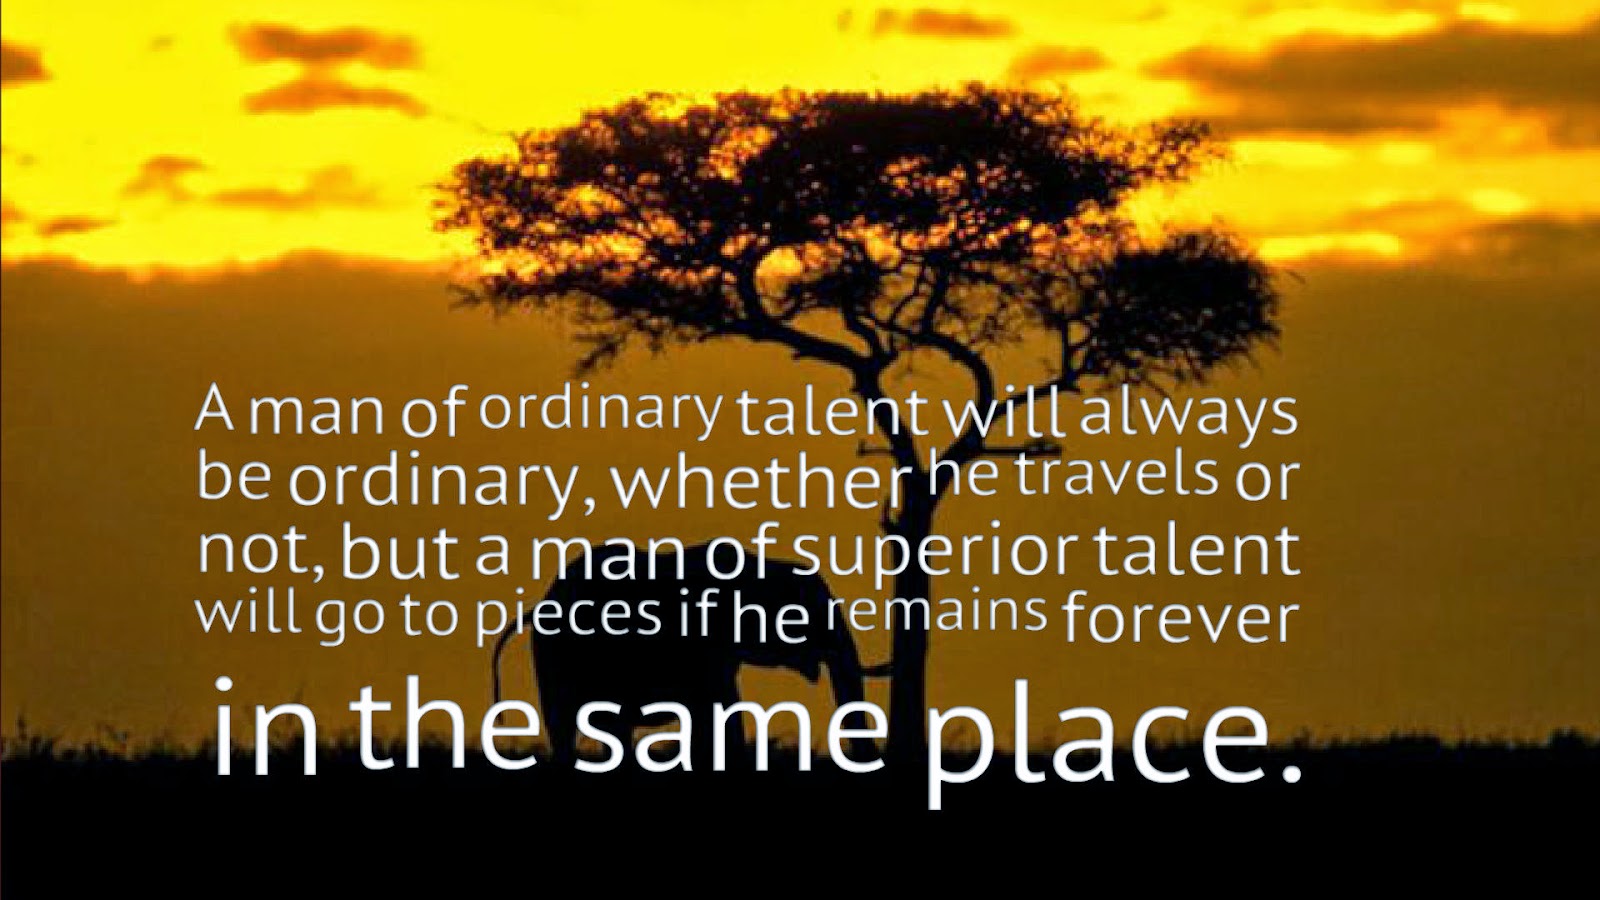 Imageresult for A man of ordinary talent will always be ordinary, whether he travels or not; but a man of superior talent will go to pieces if he remains forever in the same place.